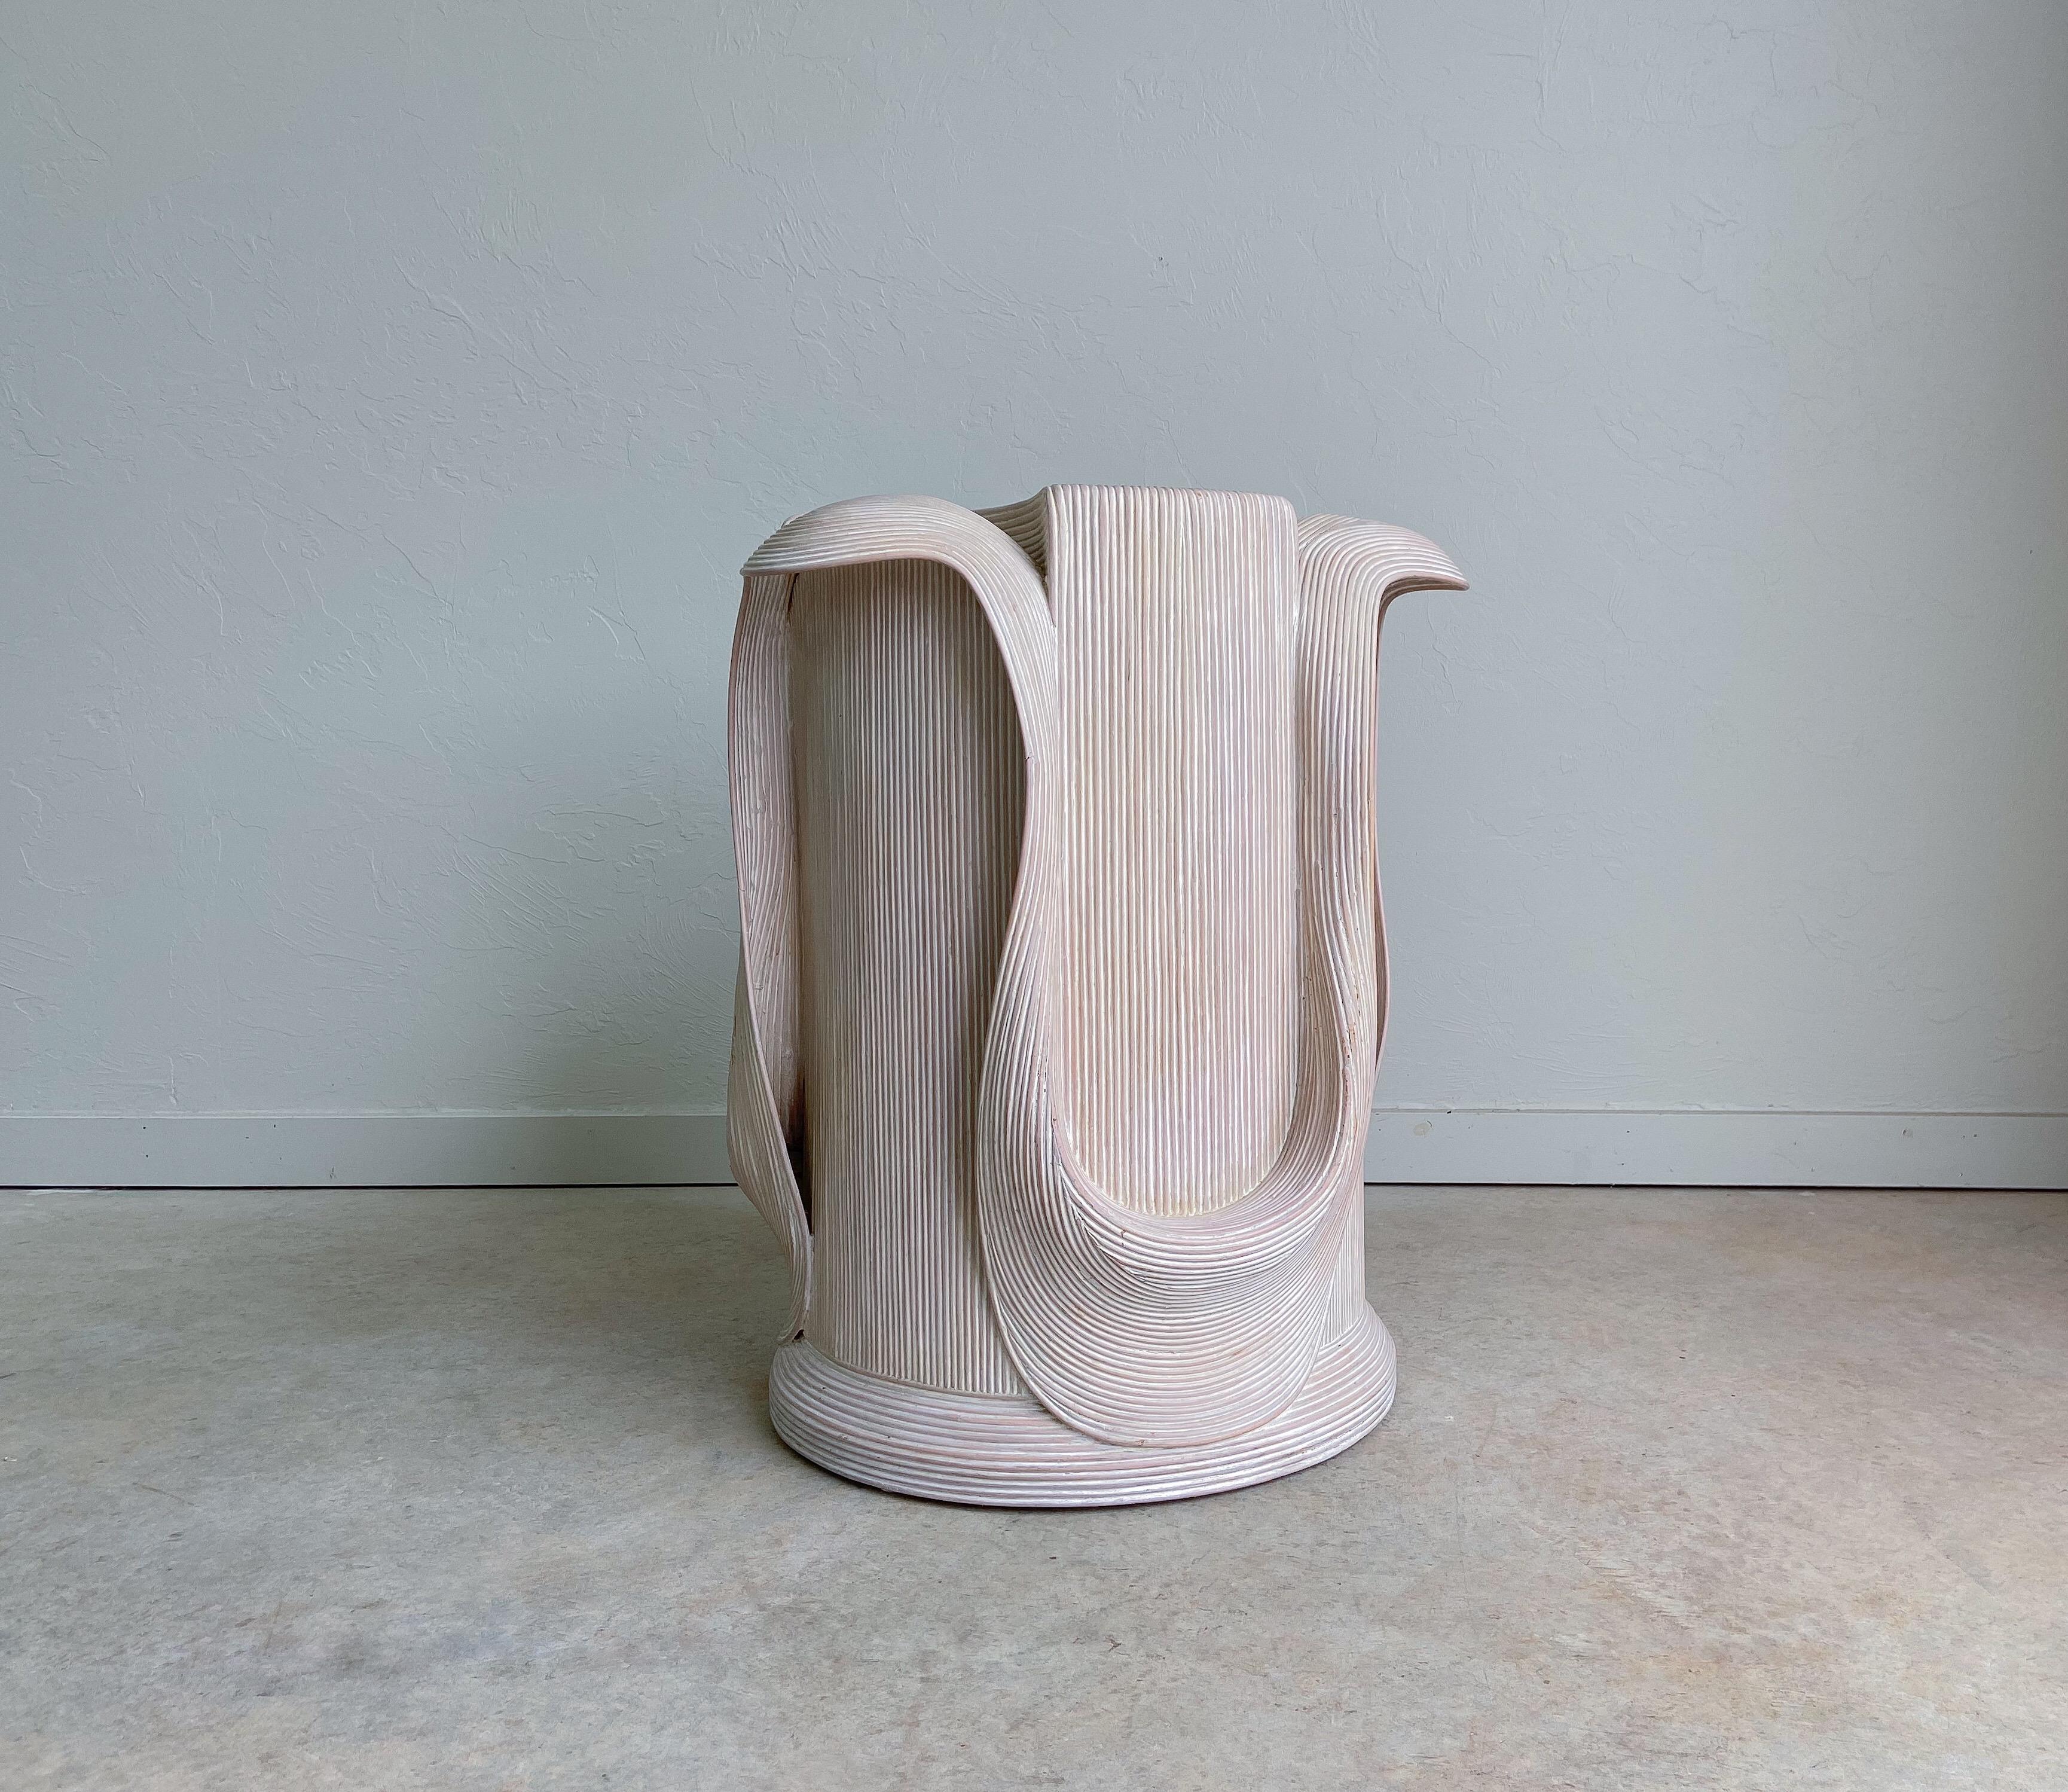 Offered is a wonderful pedestal or dining table base by designer Betty Cobonpue. Part of the Scultura line produced in the 1980’s. 

Cobonpue’s design philosophy was simple: no hard edges. This is represented in the graceful curves and incredible